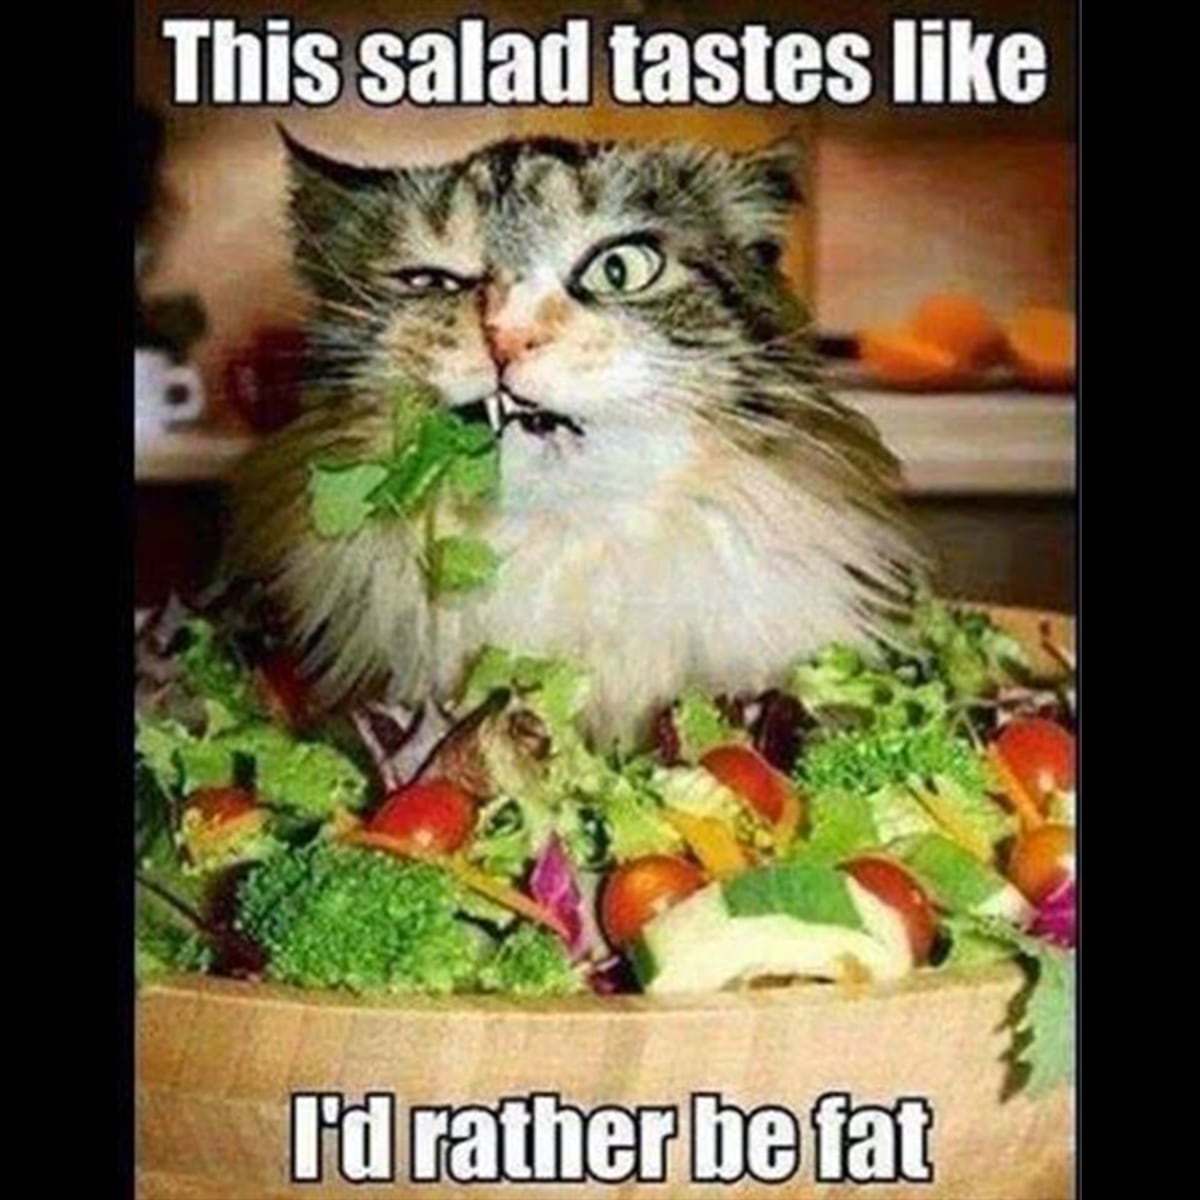 This salad tastes like I'd rather be fat.